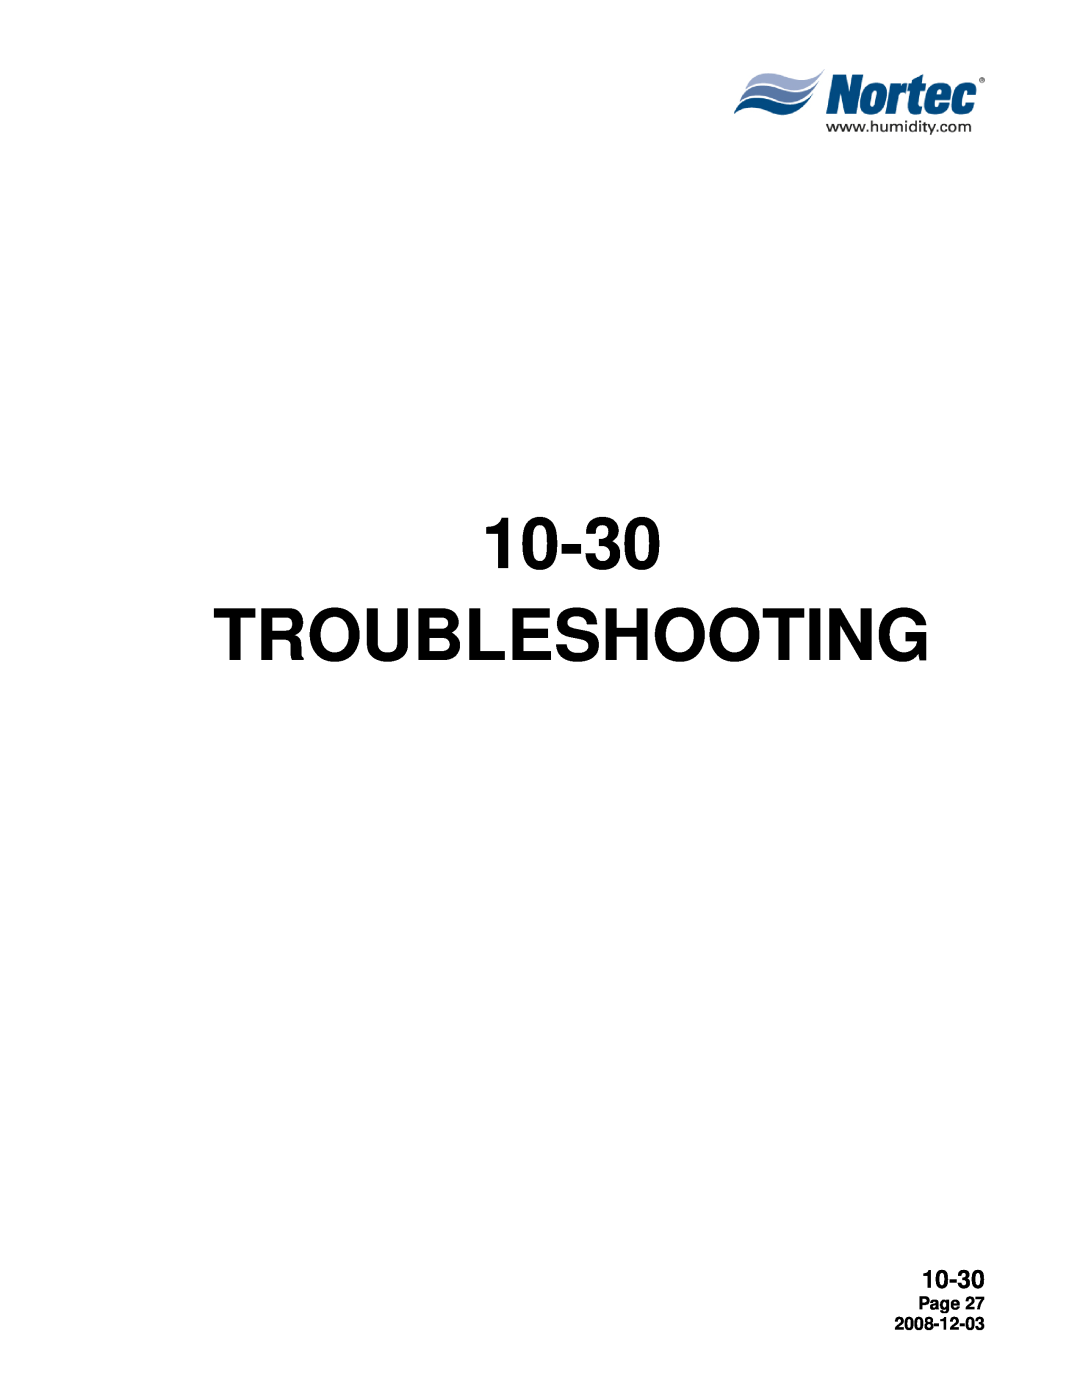 Nortec MH Series installation manual Troubleshooting, 10-30, Page 